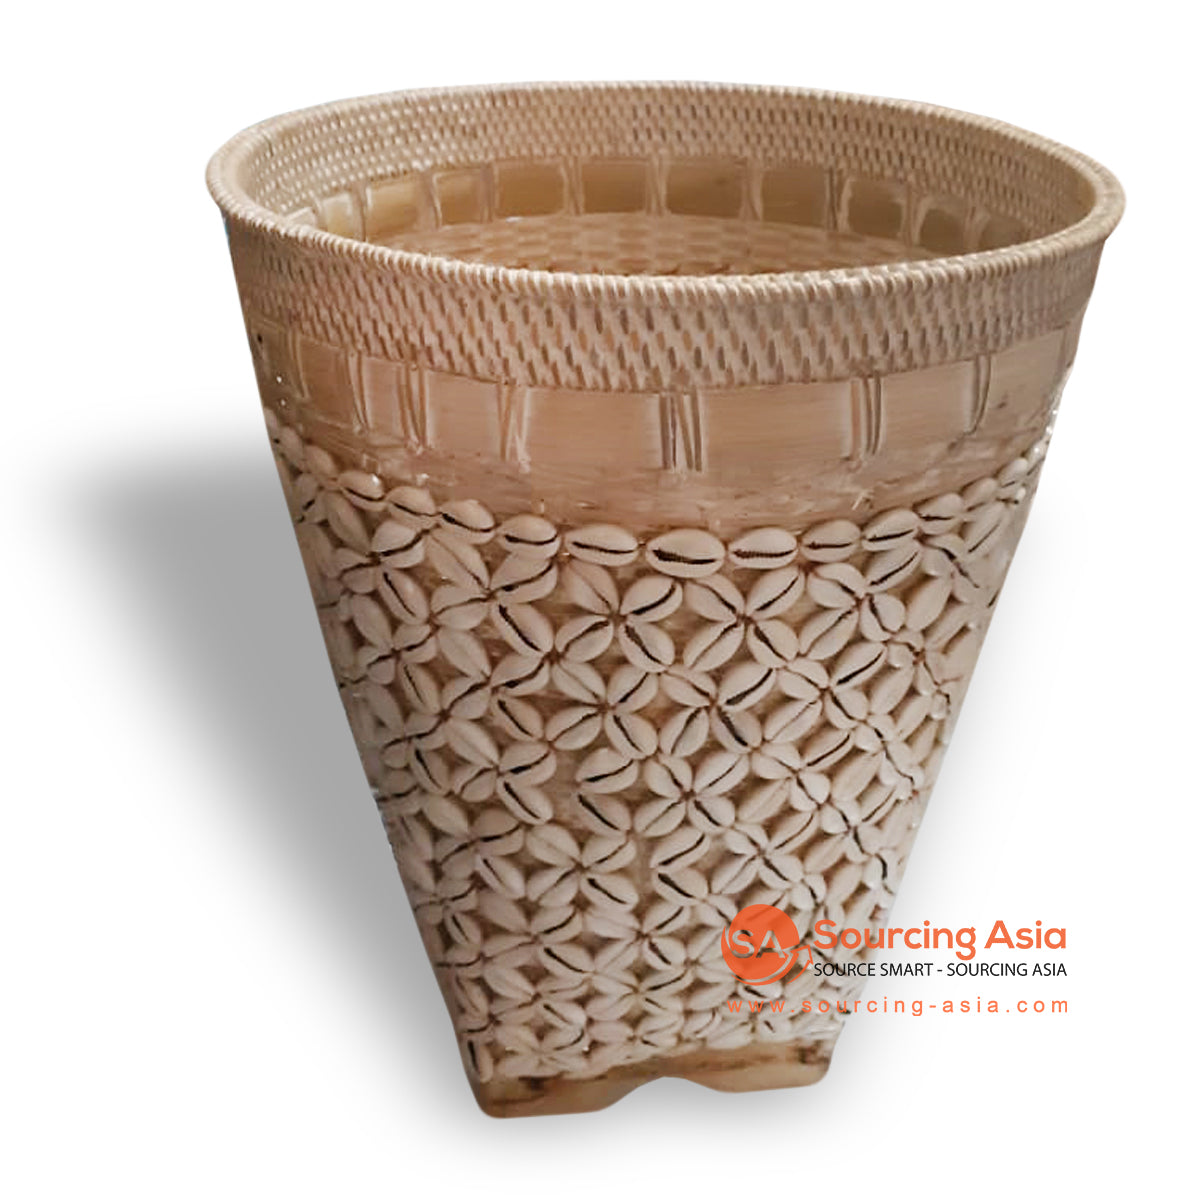 ALI072 NATURAL WOVEN RATTAN WASTE PAPER BASKET WITH SHELL ORNAMENT